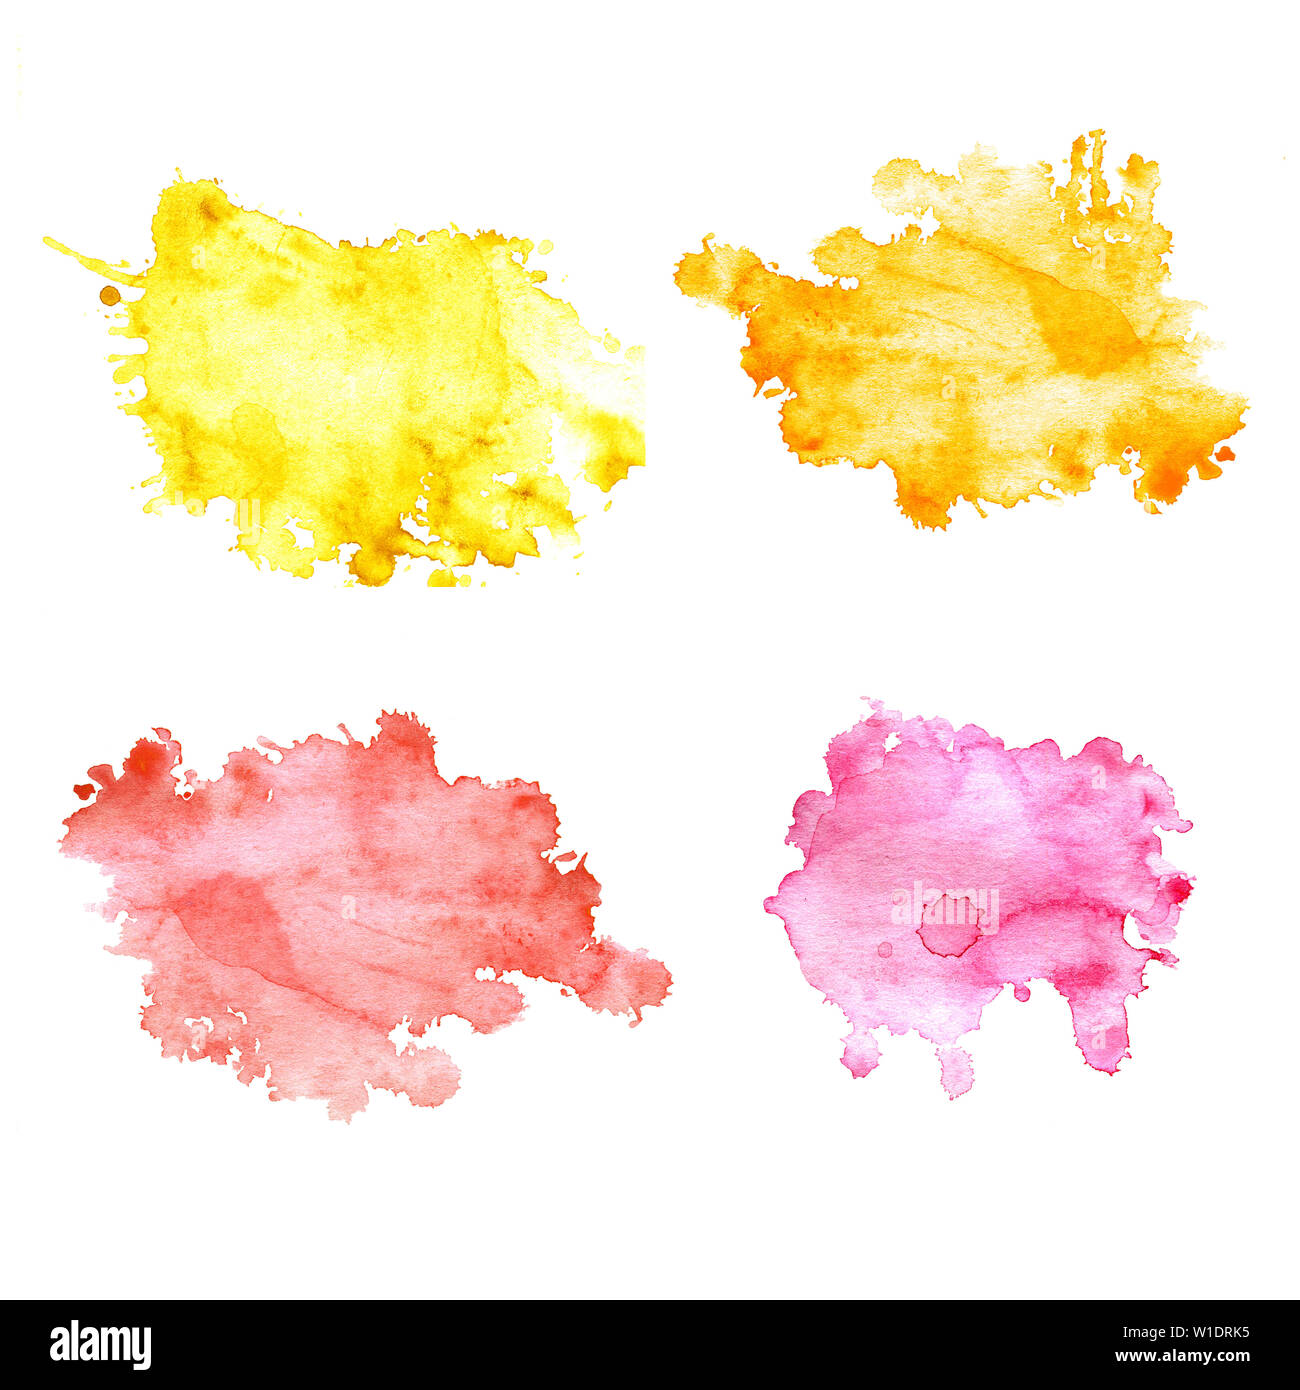 Set of 5 watercolor blots with splashes and stains. Watercolor spots of orange, yellow, pink and red flowers. Isolated blots on a white background, dr Stock Photo